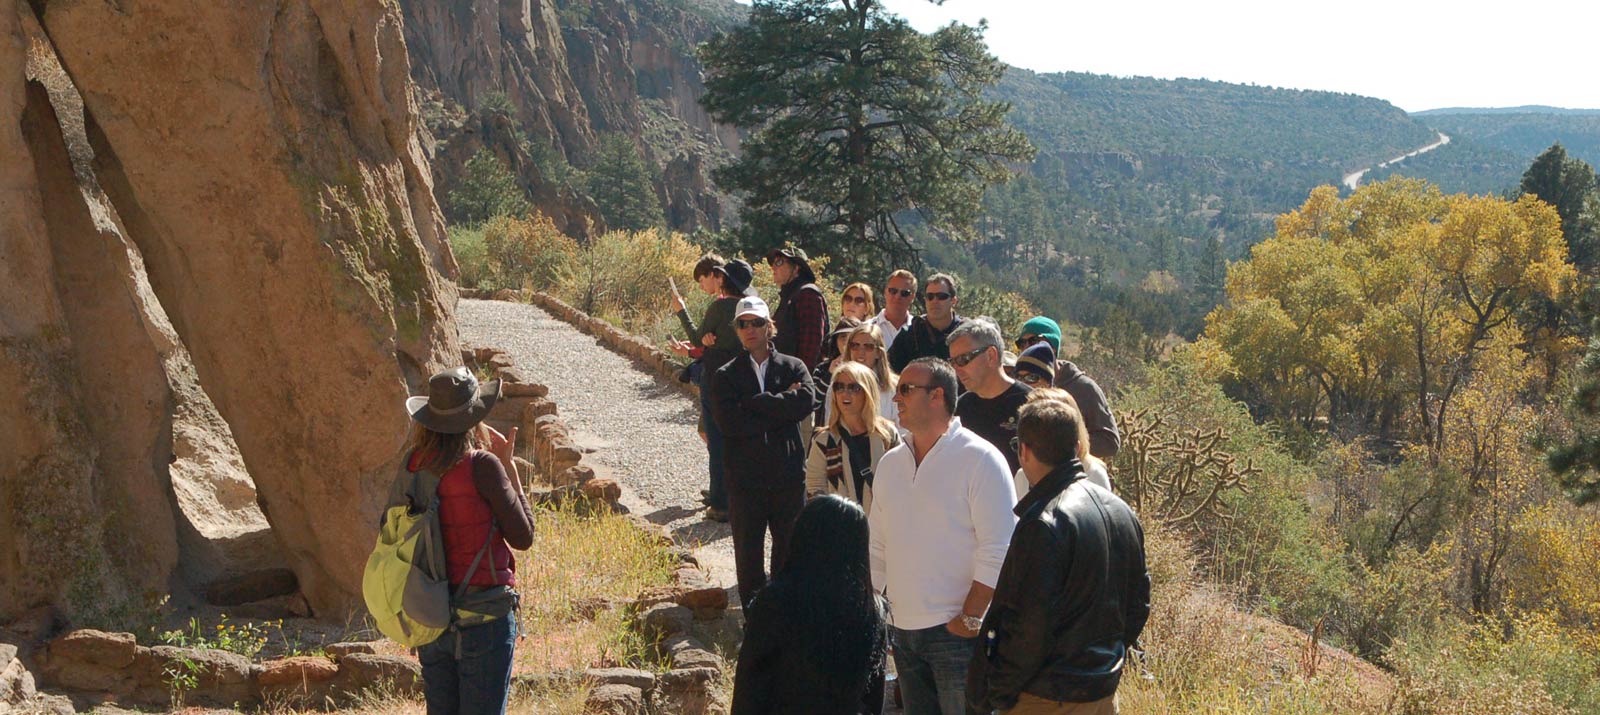 Group with Monique at Bandelier